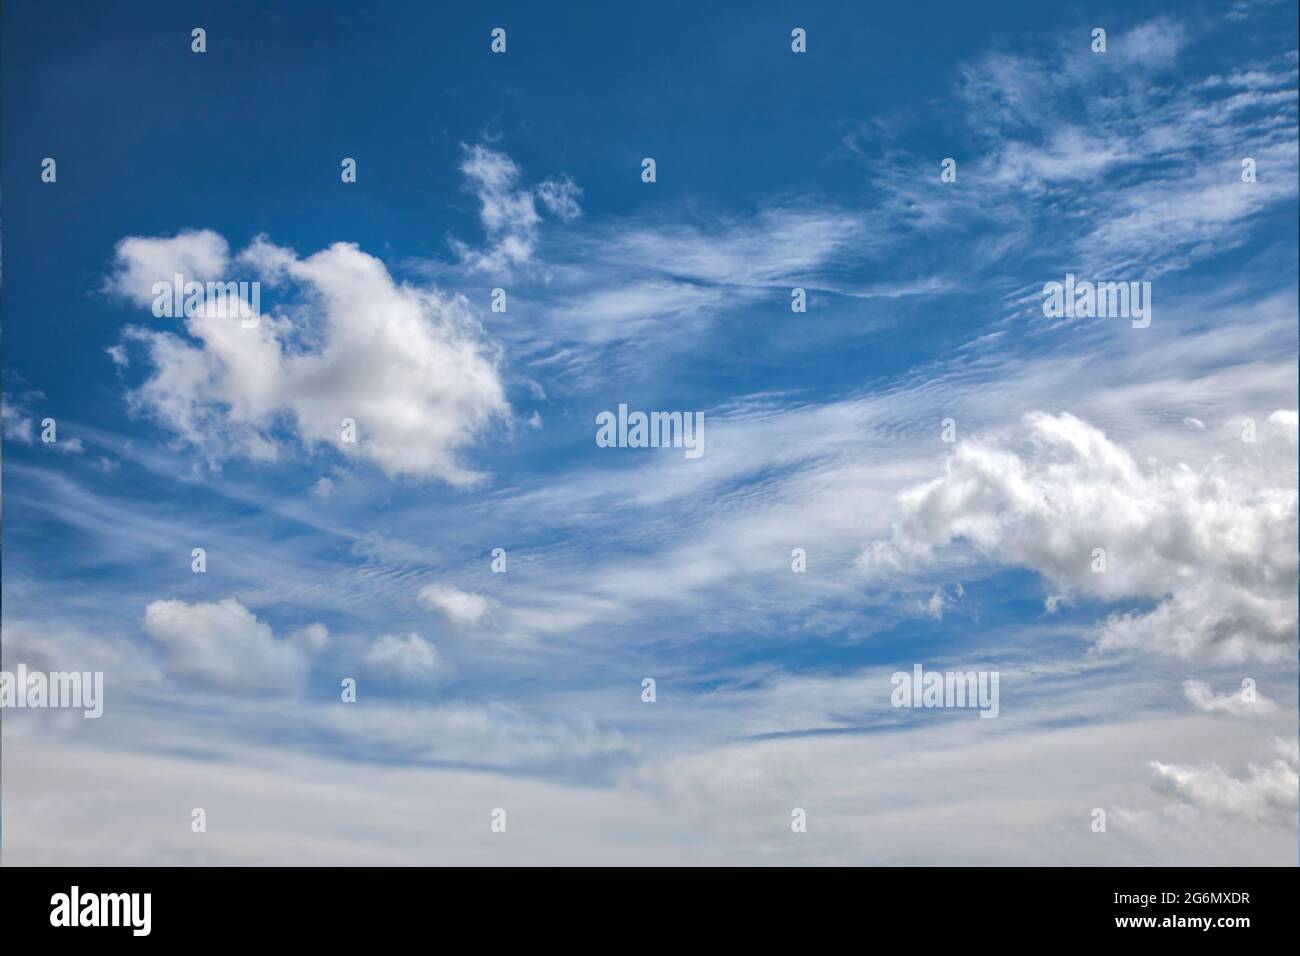 CONCEPT PHOTOGRAPHY: Blue sky with dramatic cloud formation Stock Photo